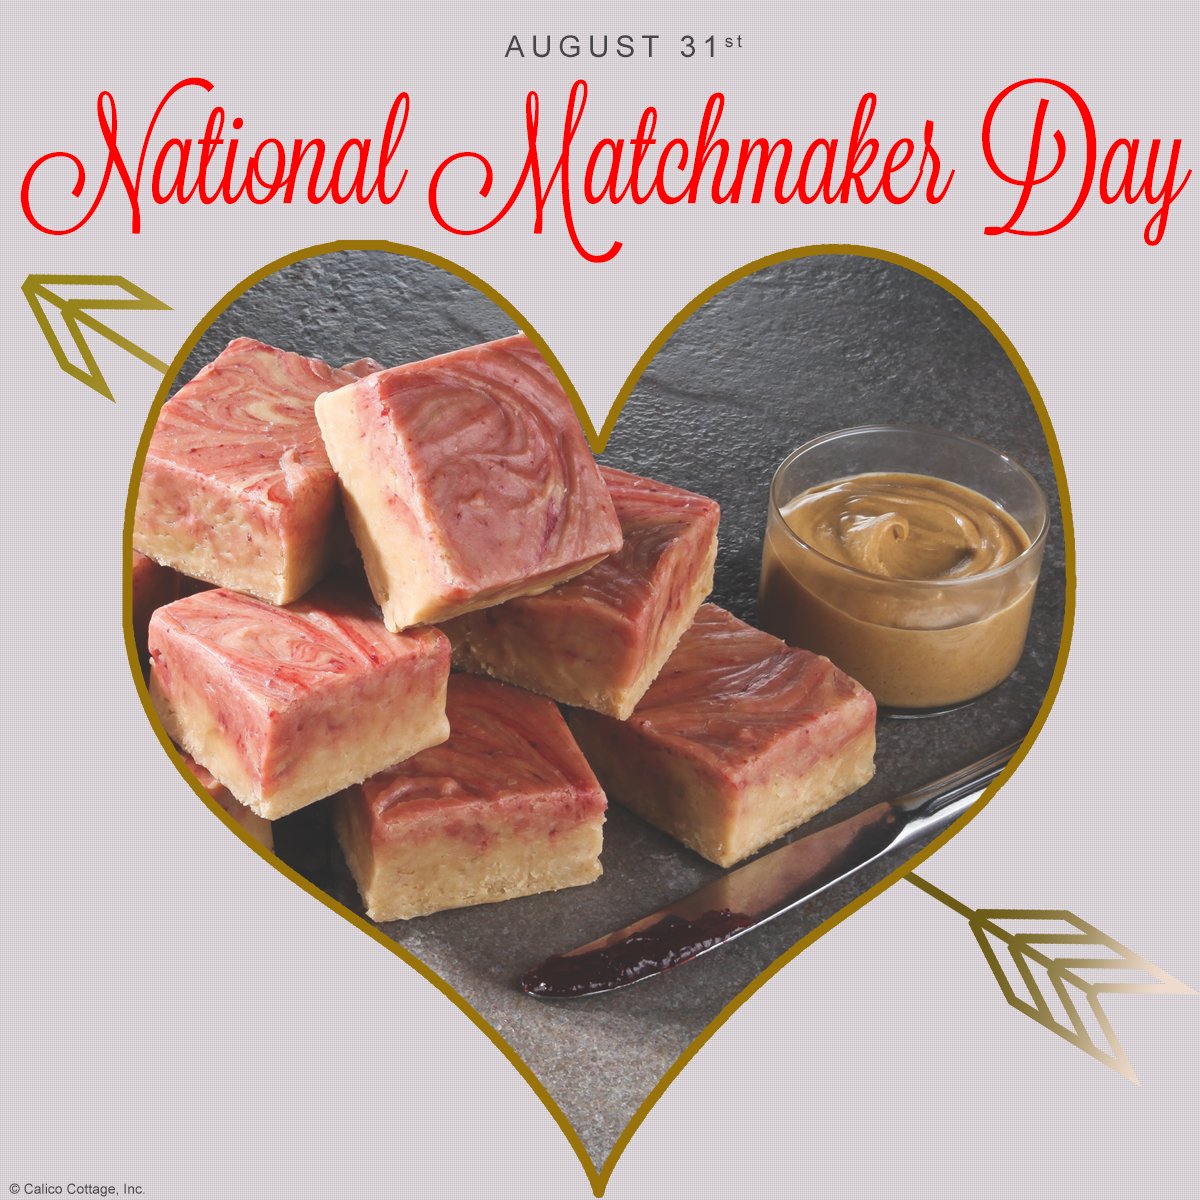 Calico Cottage Inc On Twitter Tomorrow Is National Matchmaker